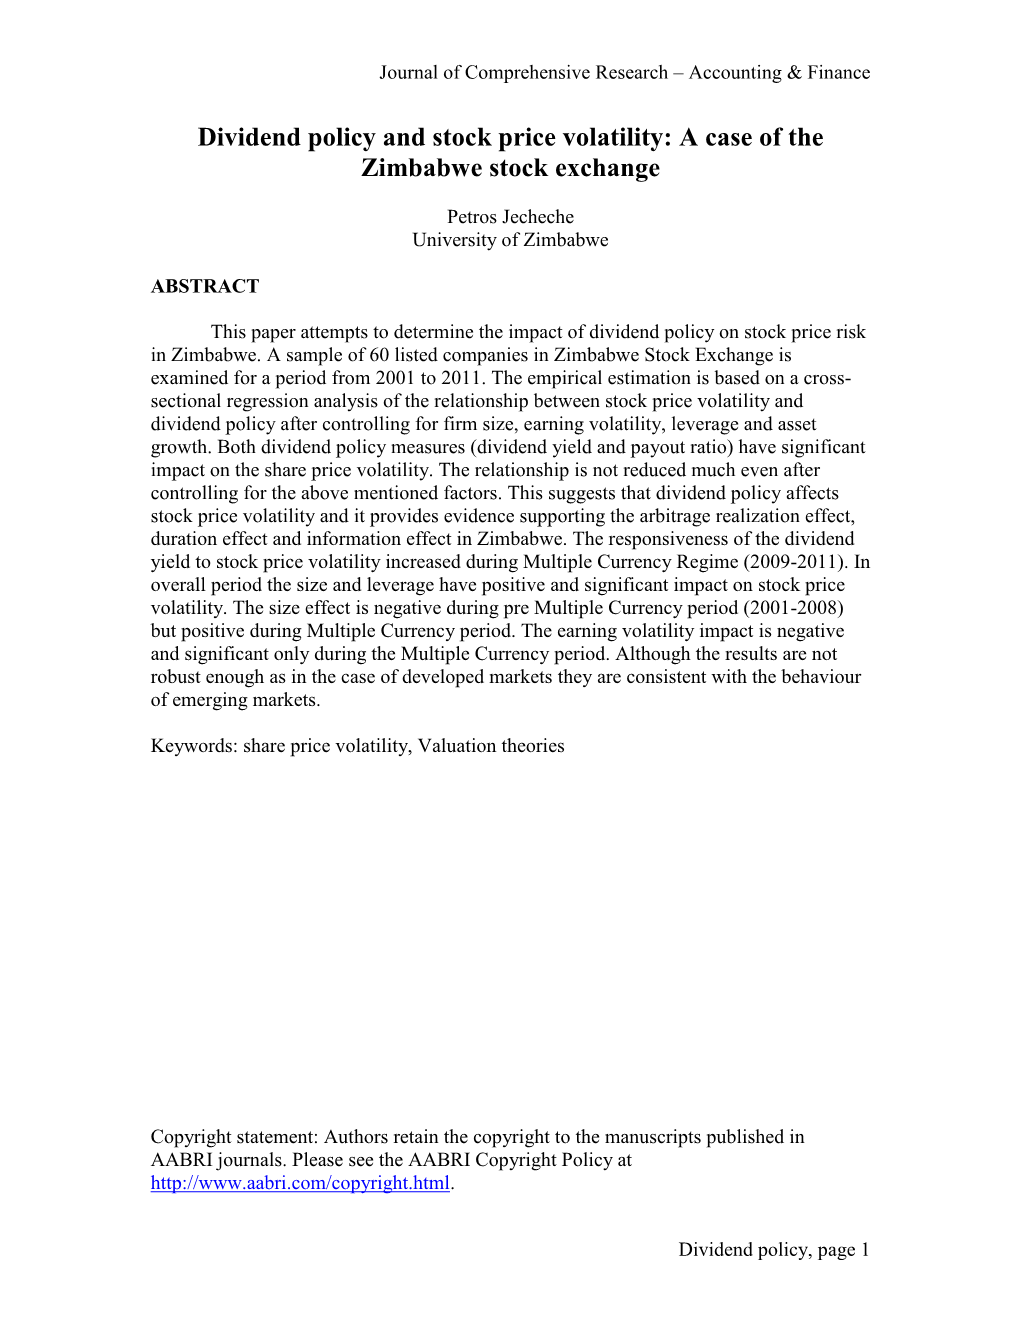 Dividend Policy and Stock Price Volatility: a Case of the Zimbabwe Stock Exchange